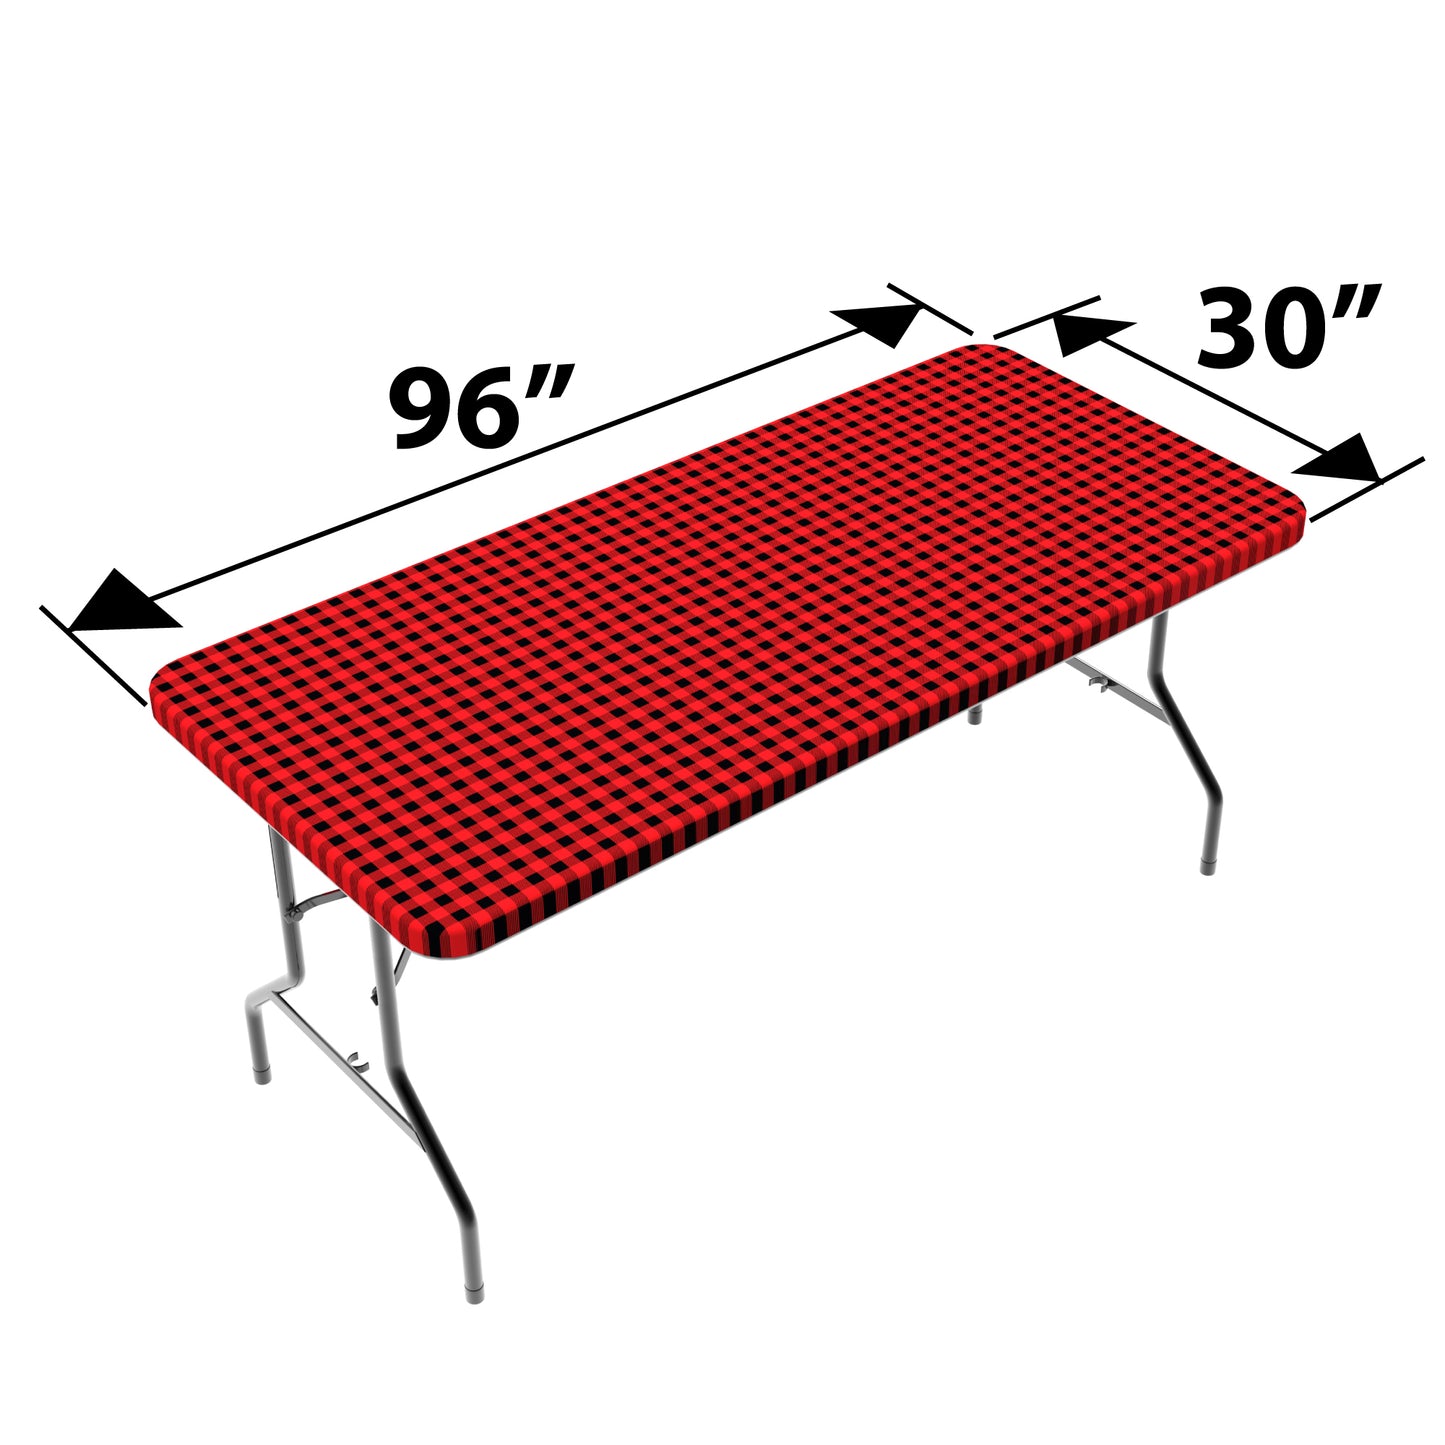 A closeup of a TableCloth PLUS 96" Checkerboard Black and Red Fitted PEVA Vinyl Tablecloth for 8' Folding Tables gripping a folding table around the entire table edge